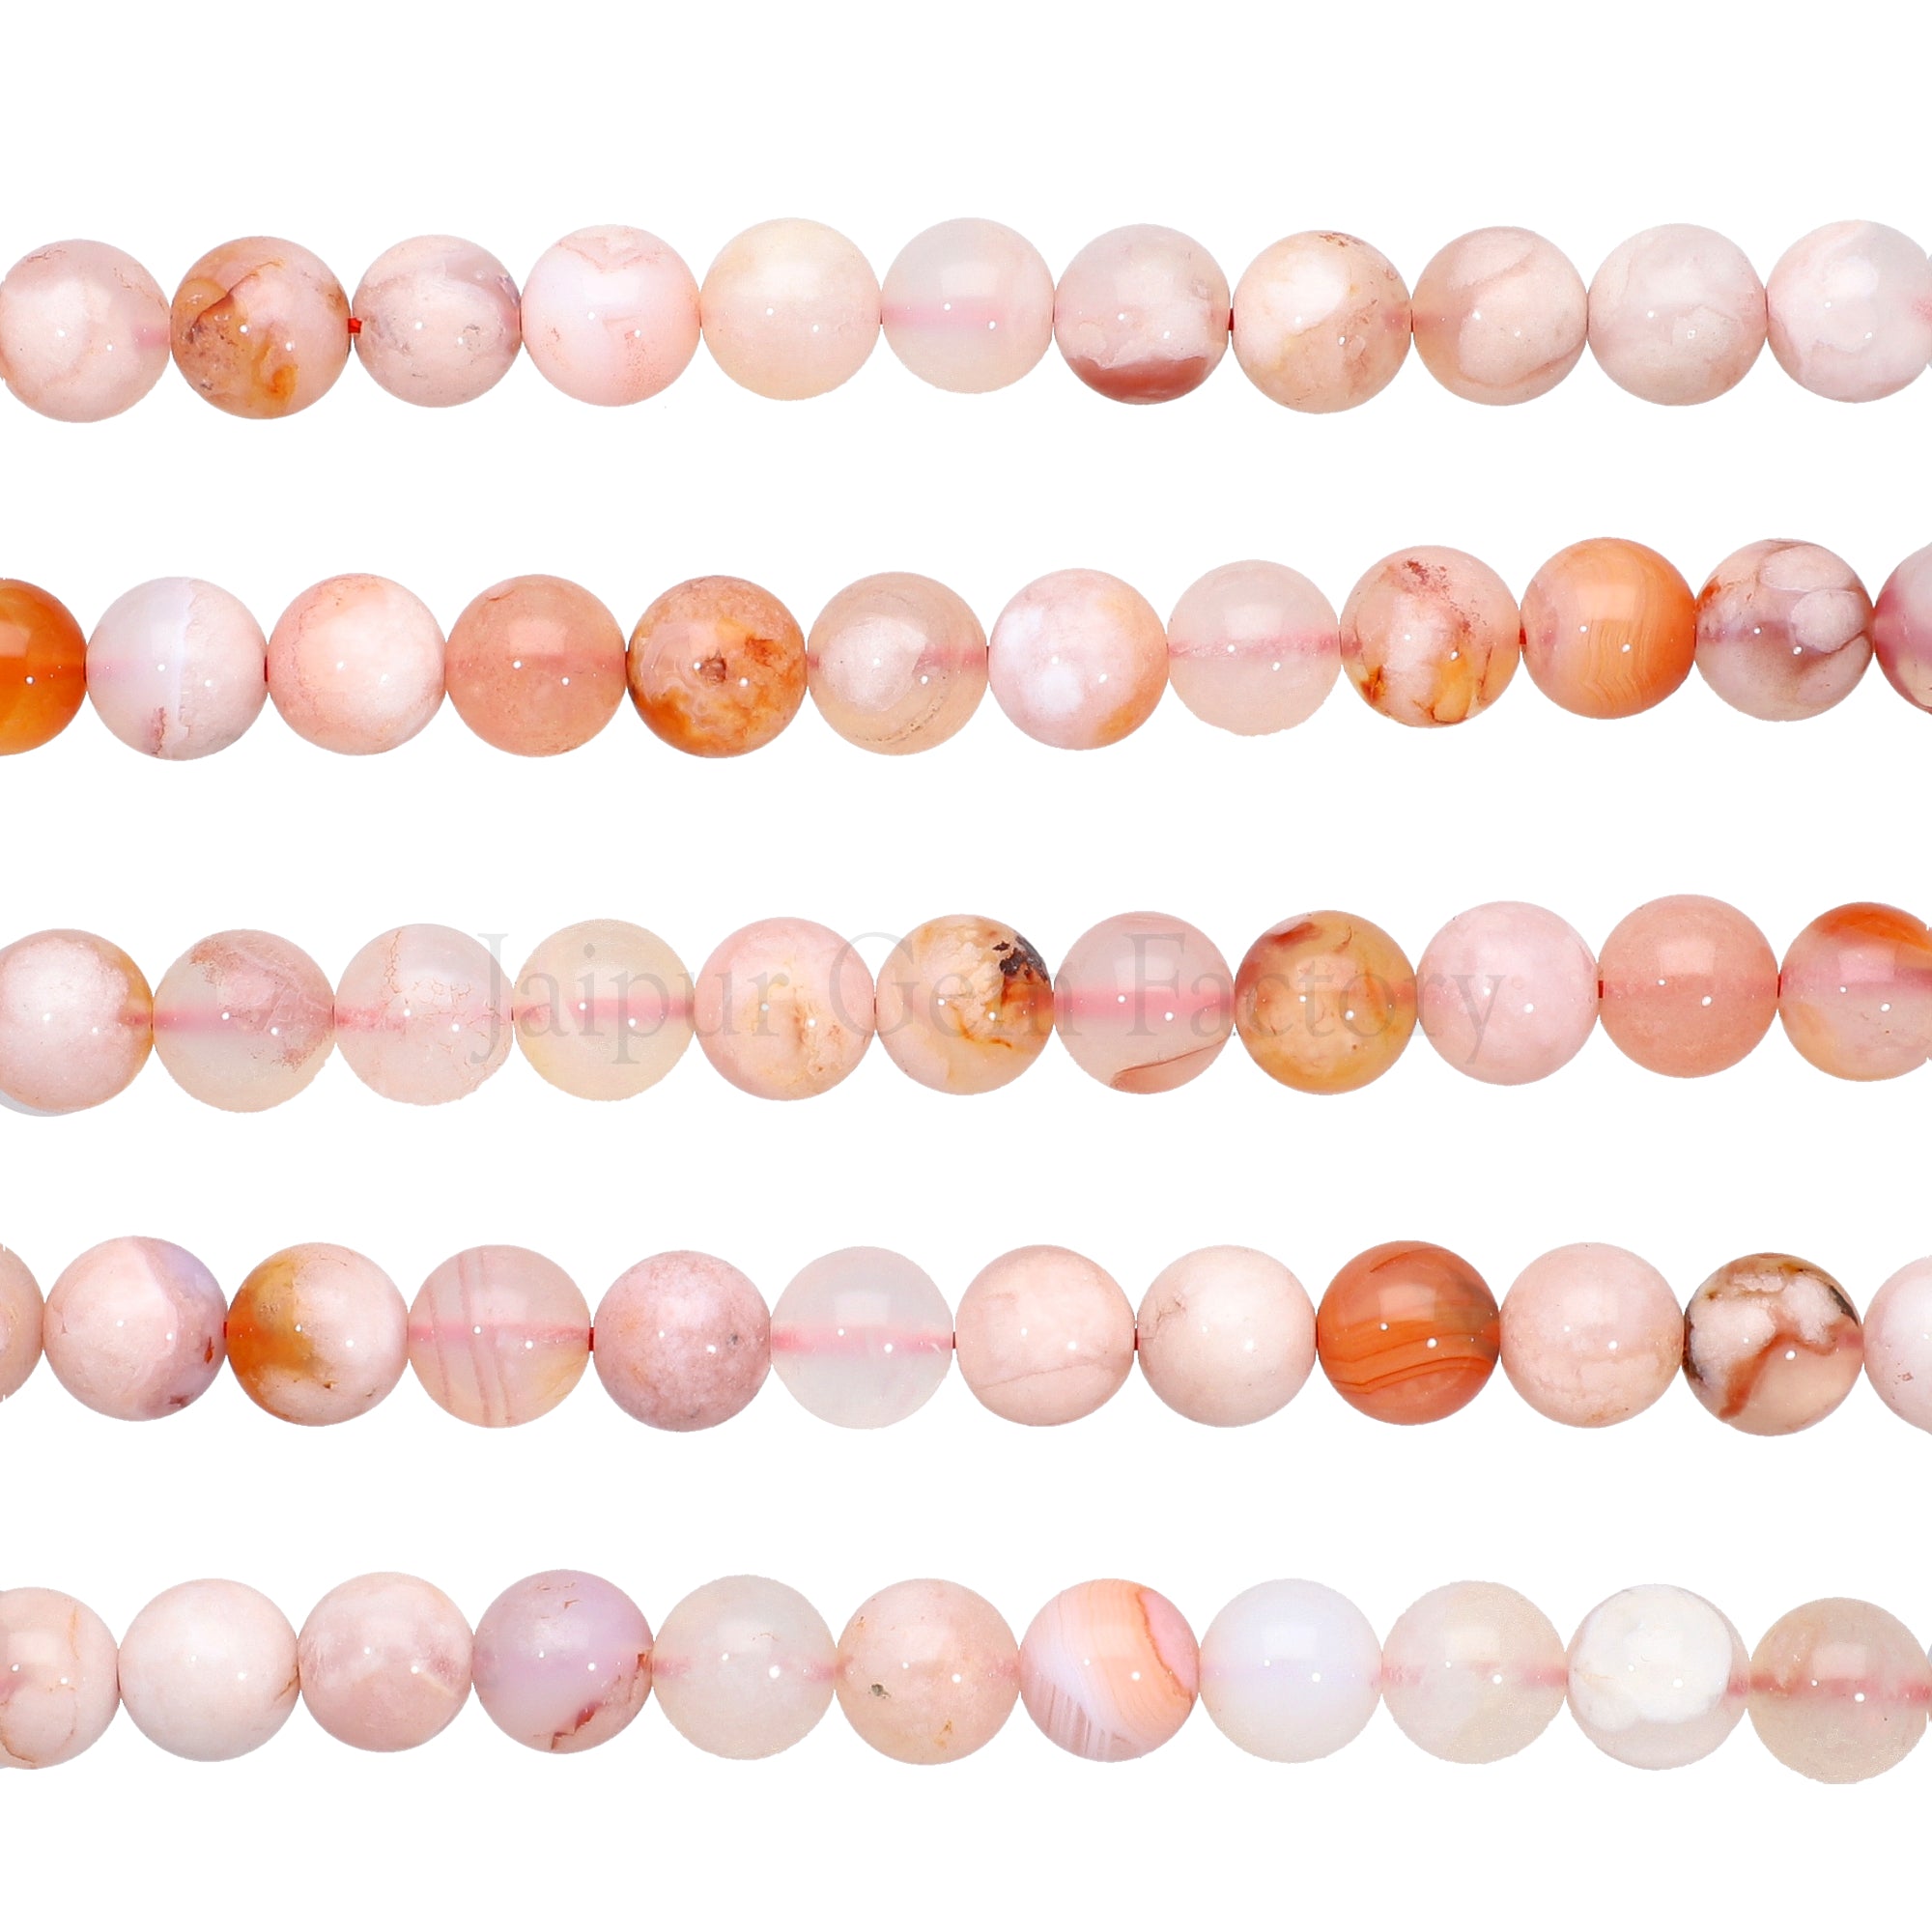 8 MM Natural Pink White Agate Smooth Round Beads 15 Inches Strand